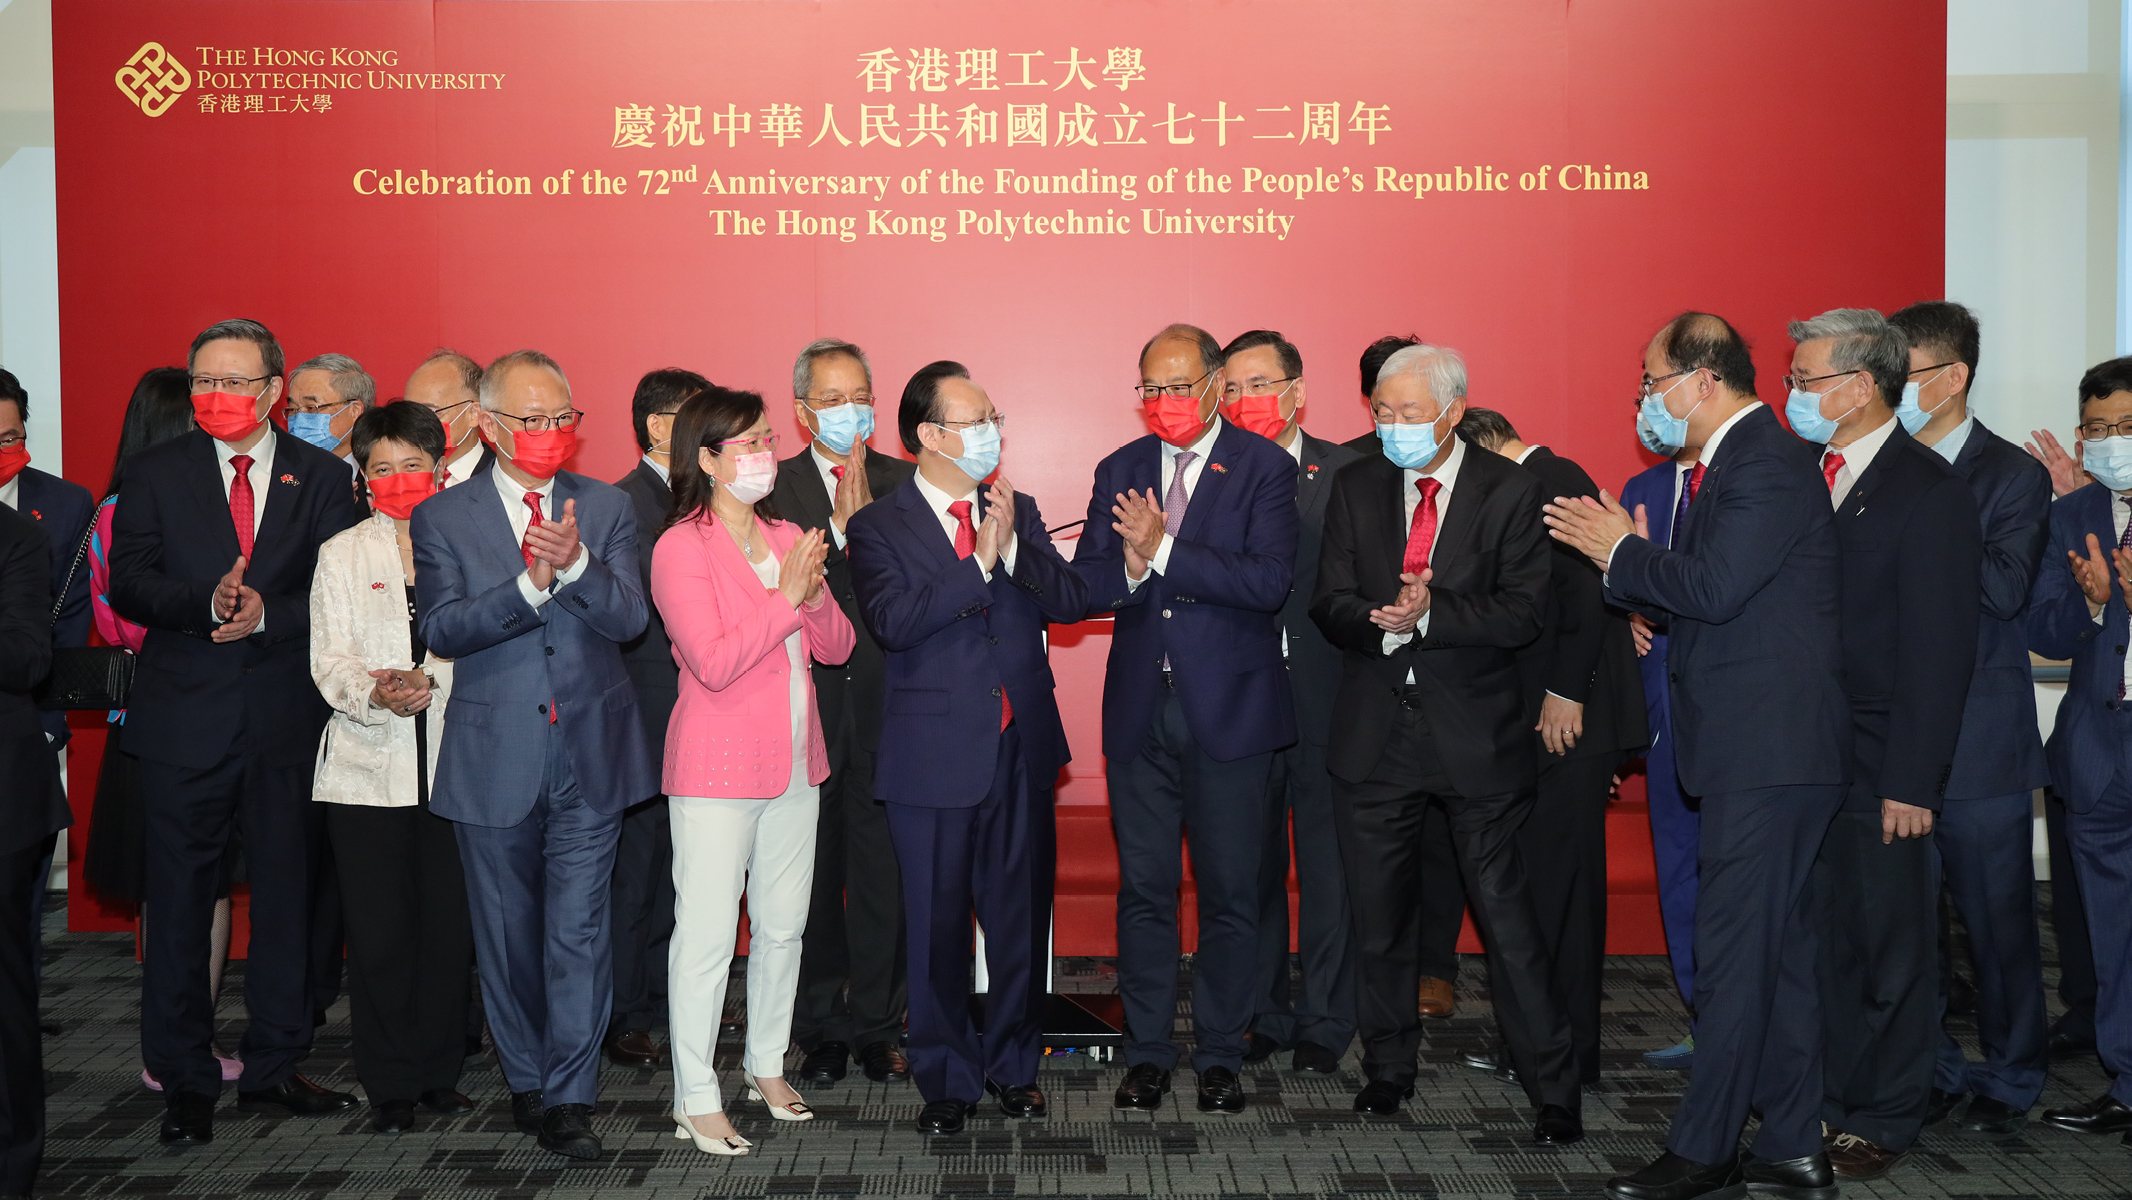 Professor Tian Tieniu (front row, middle), PolyU Council Chairman Dr Lam Tai-fai, Deputy Chairman Dr Lawrence Li (front row, fourth and third from right), Court Chairman Dr Katherine Ngan, Honorary Court Chairman Dr Roy Chung (front row, fourth and third from left) and other senior members of the University attended the ceremony.